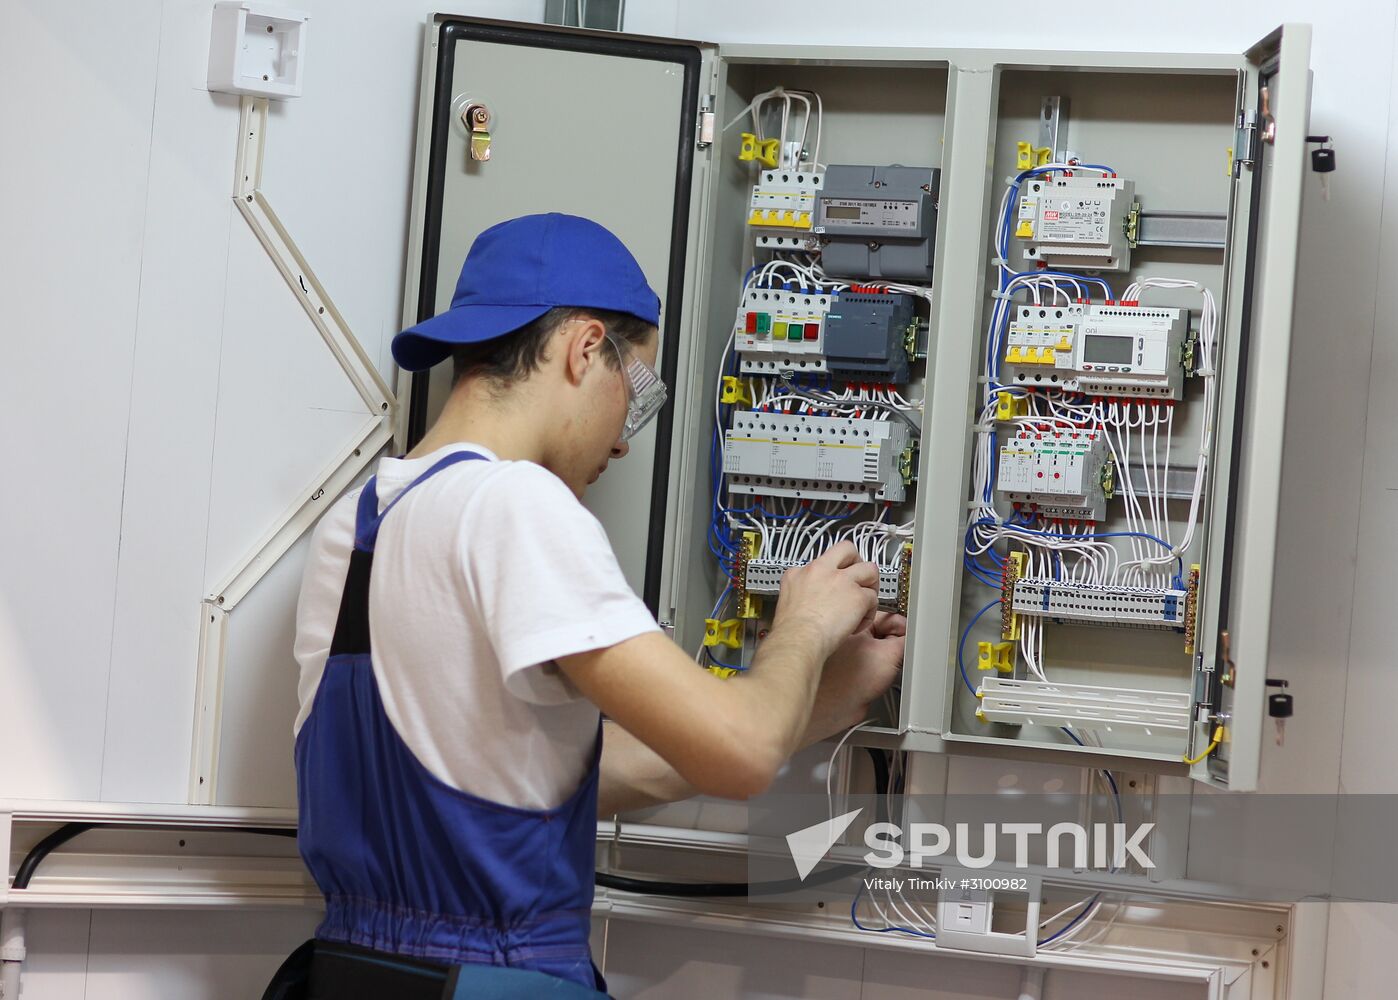 5th WorldSkills Russia National Competition takes place in Krasnodar